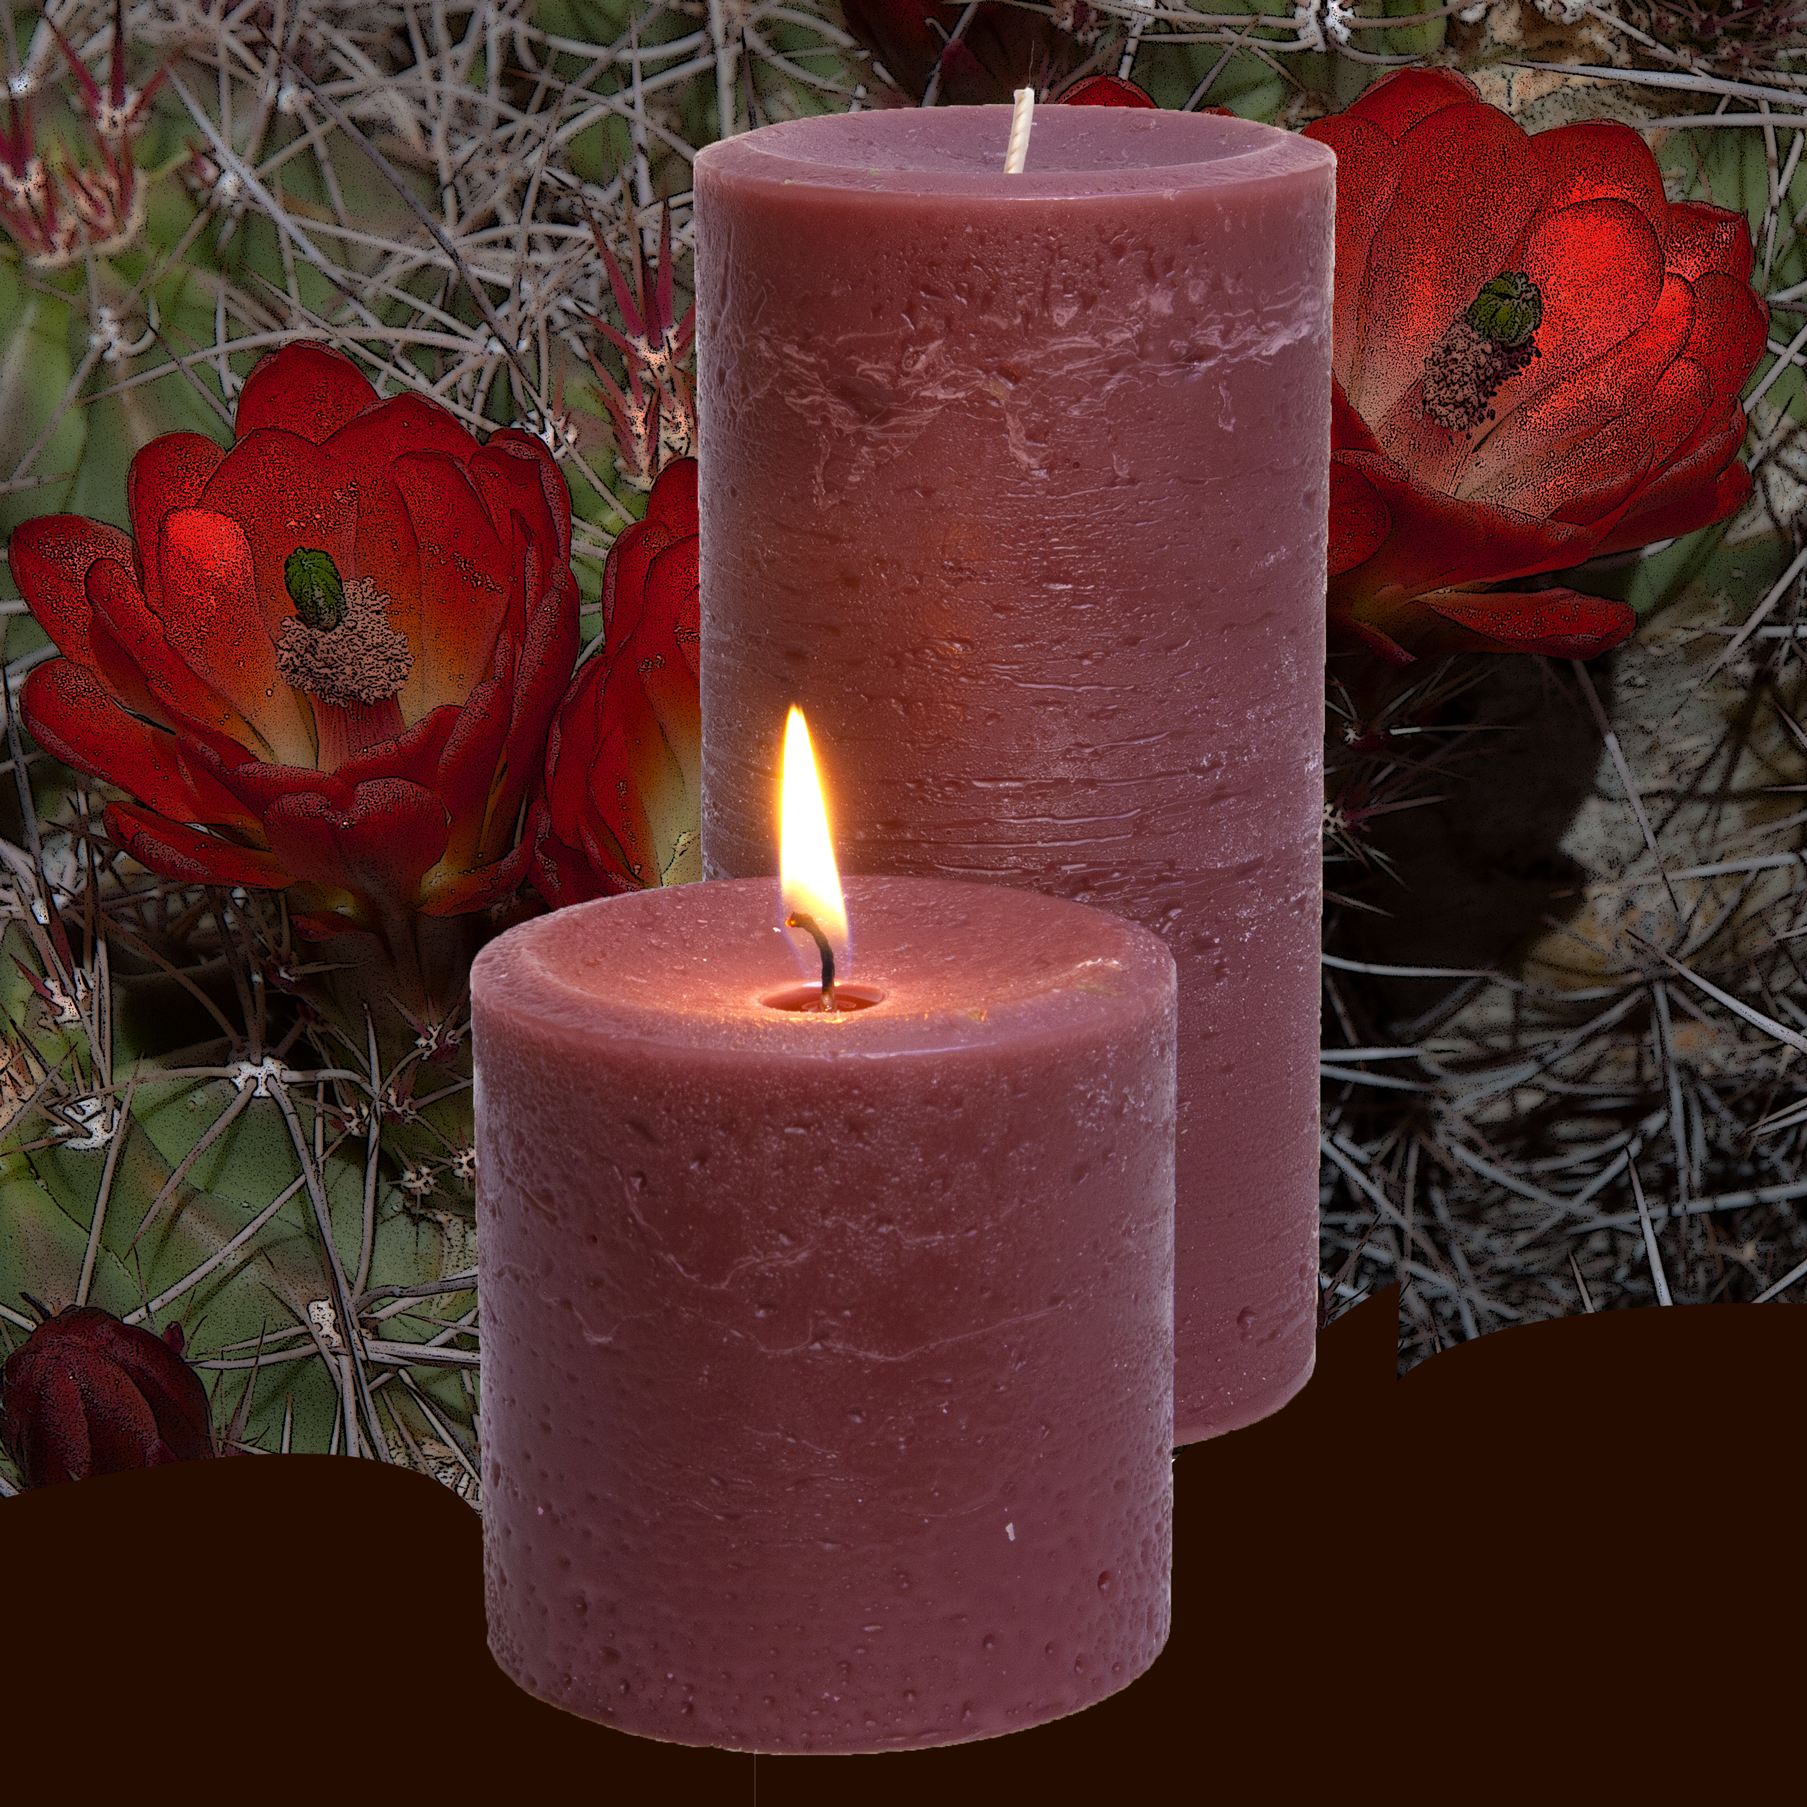 ester & erik - Quality candles designed and produced in Denmark